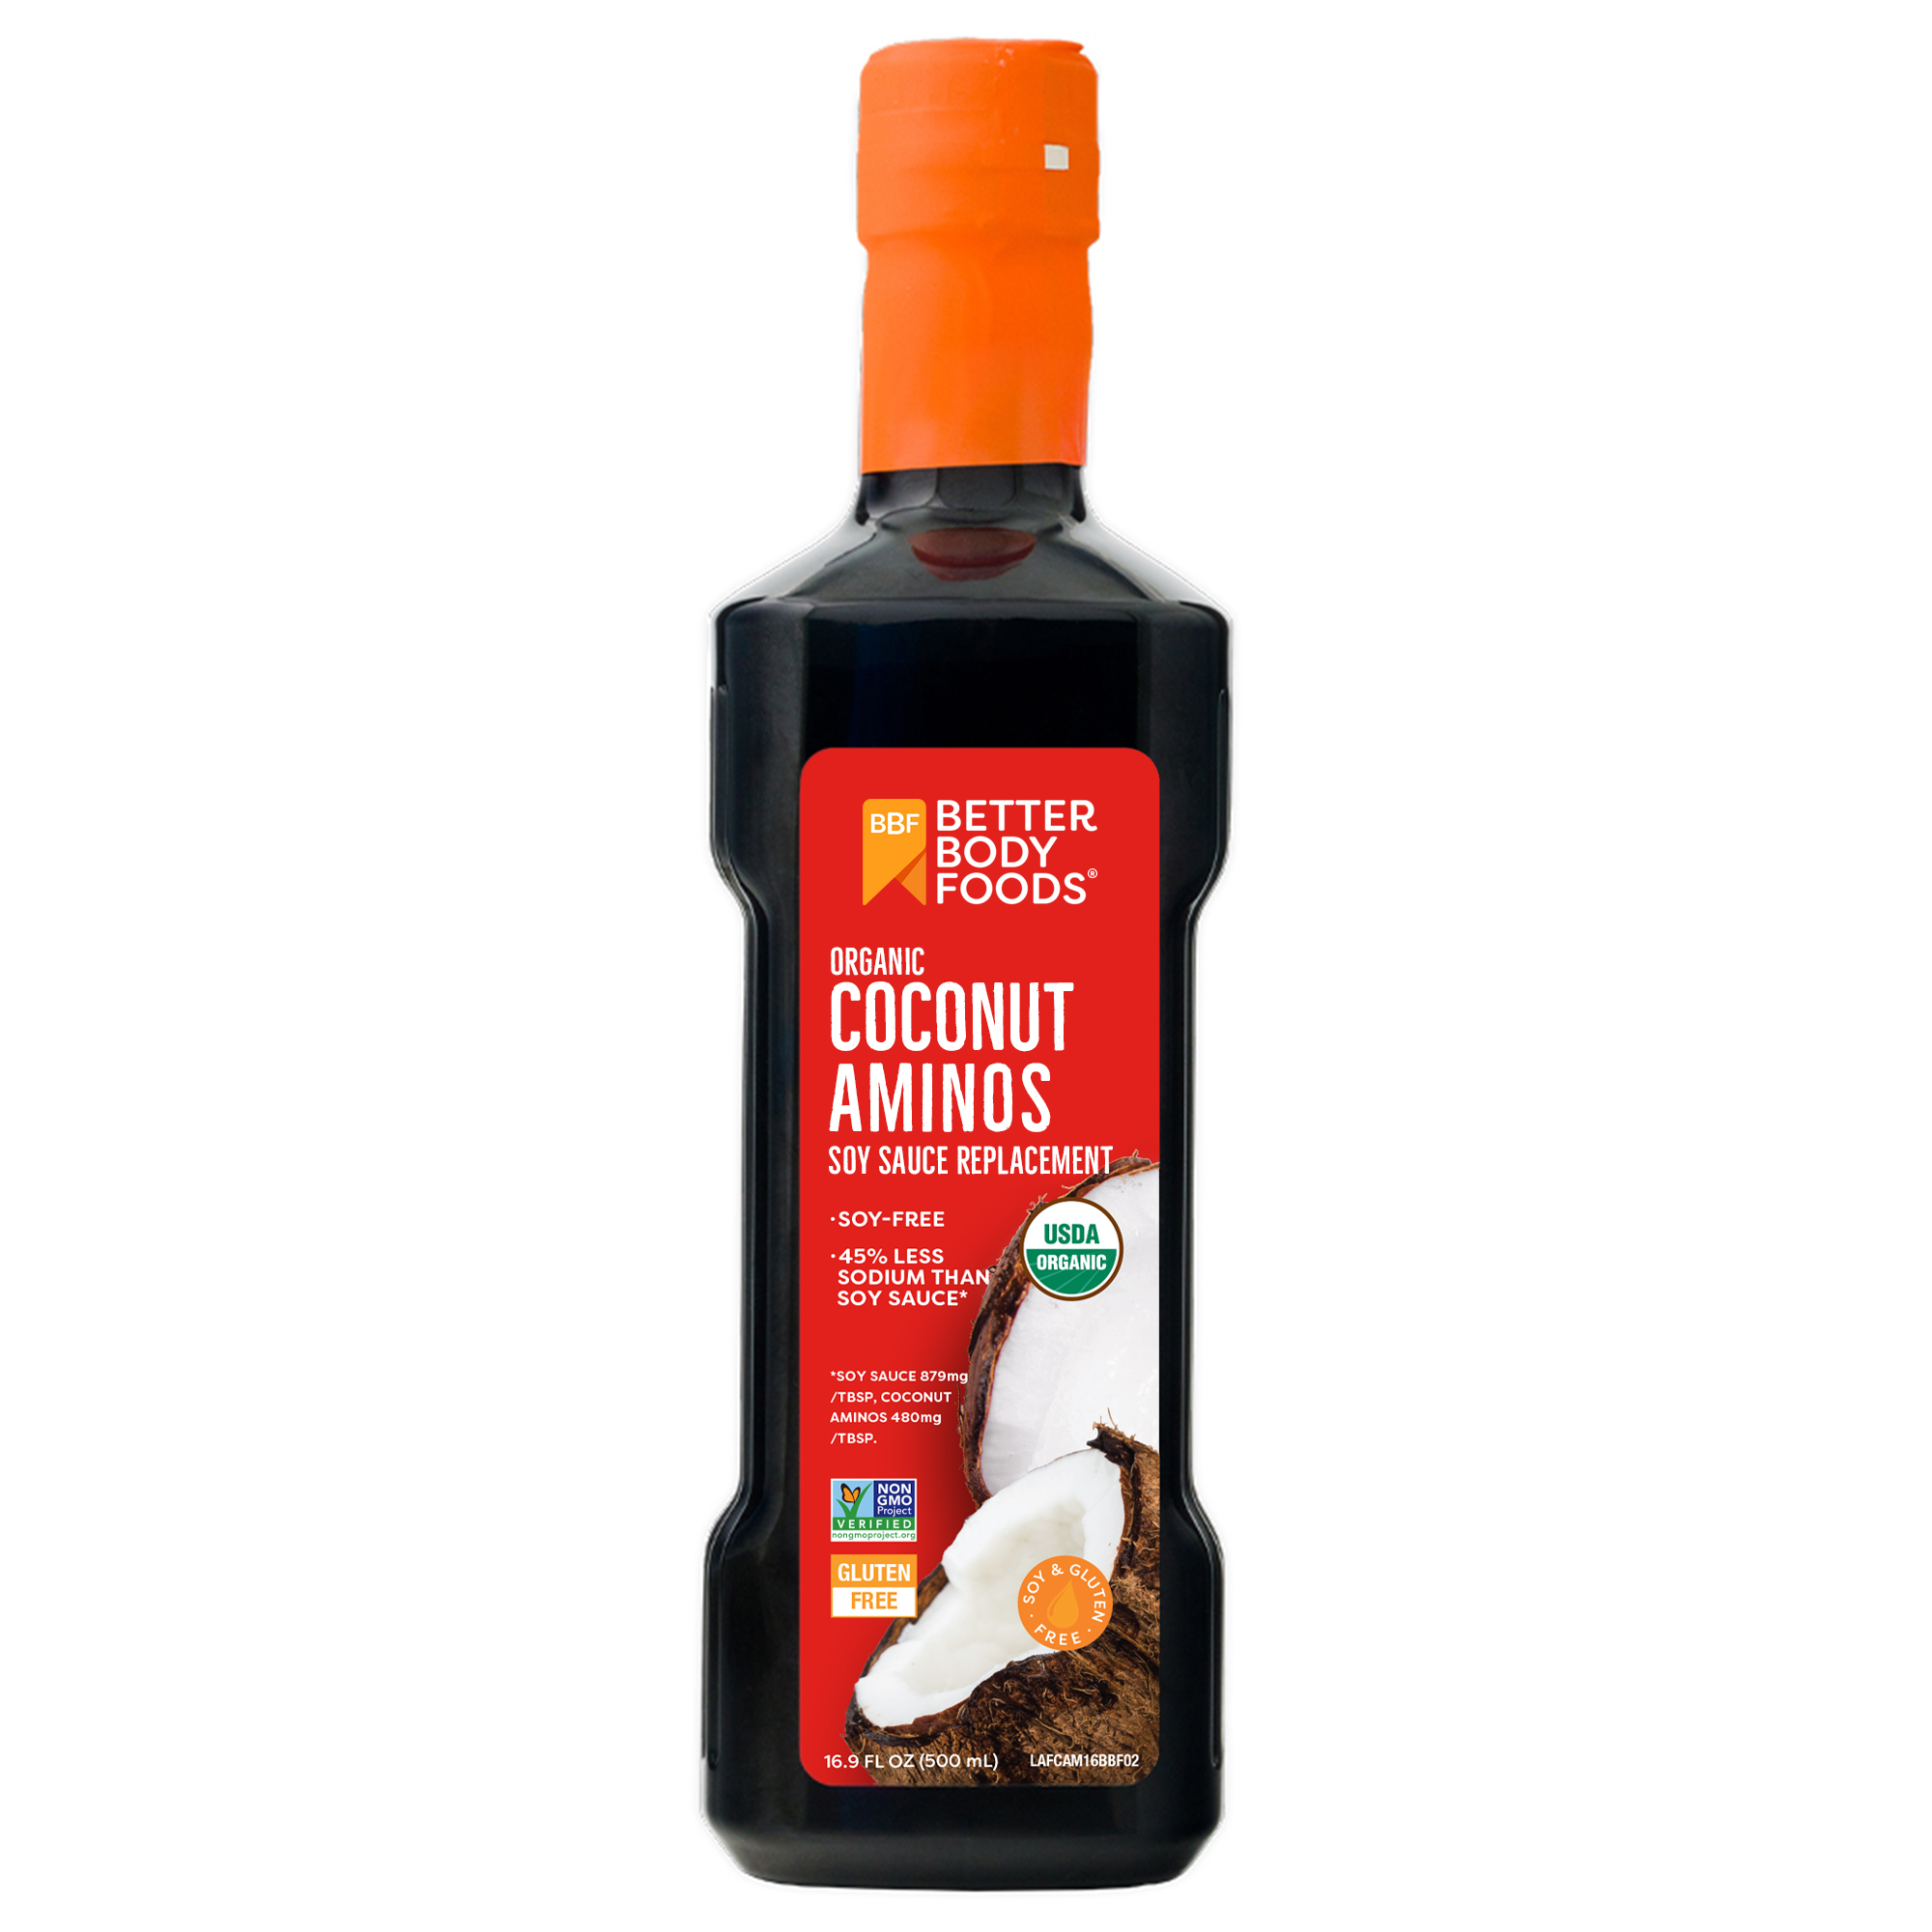 BetterBody Foods Organic Coconut Aminos Soy Sauce Replacement, 16.9 fl oz - image 1 of 7